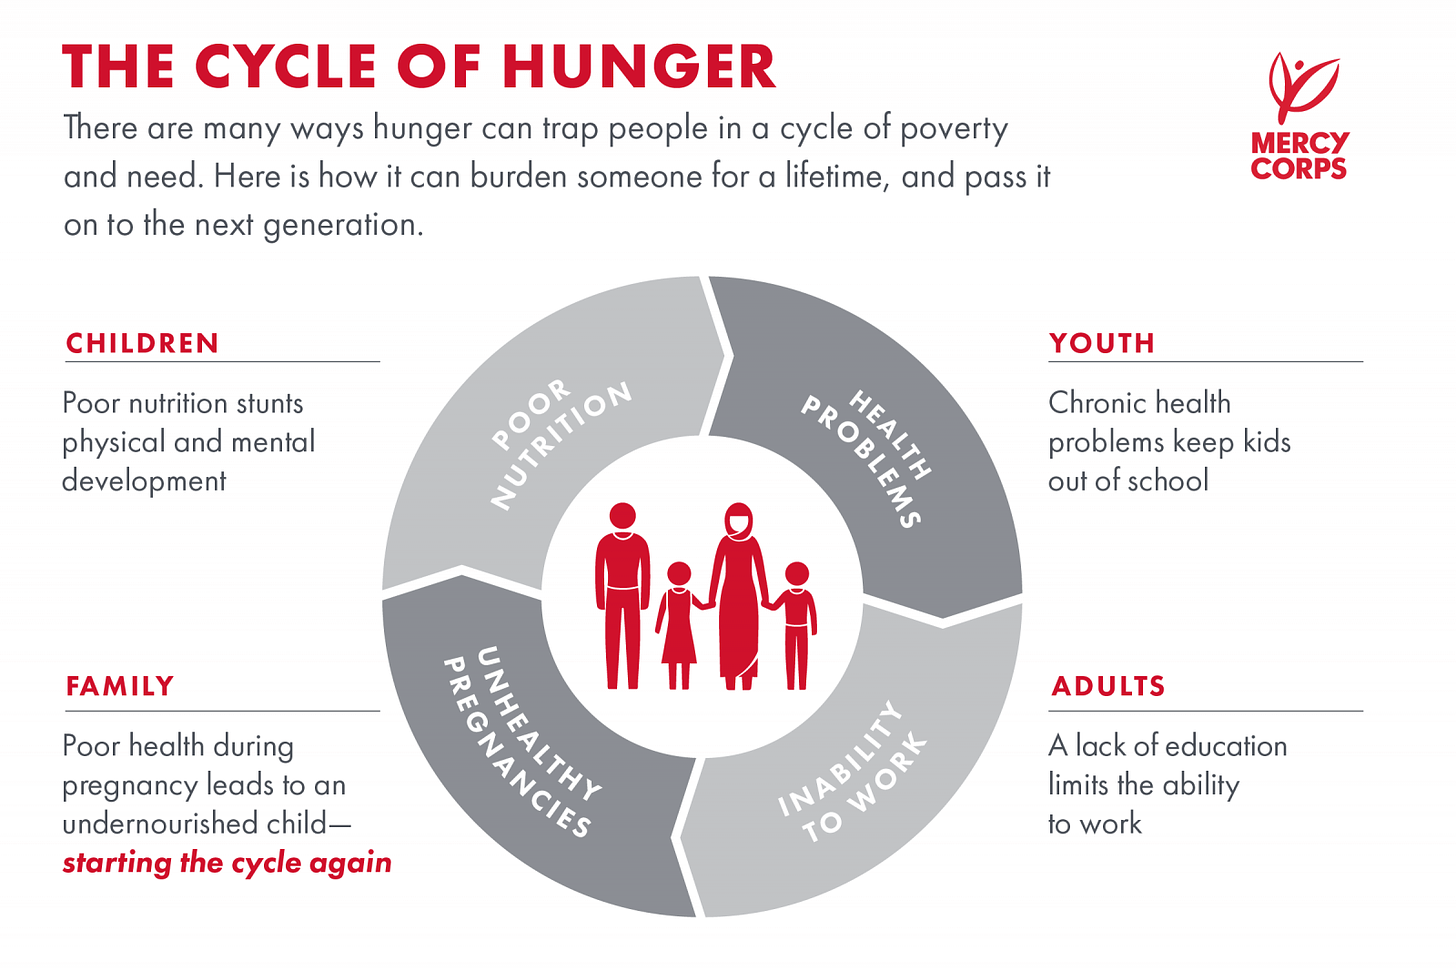 The poverty cycle shows that hunger and poverty trap us into a cycle of ill health and poor nutrition